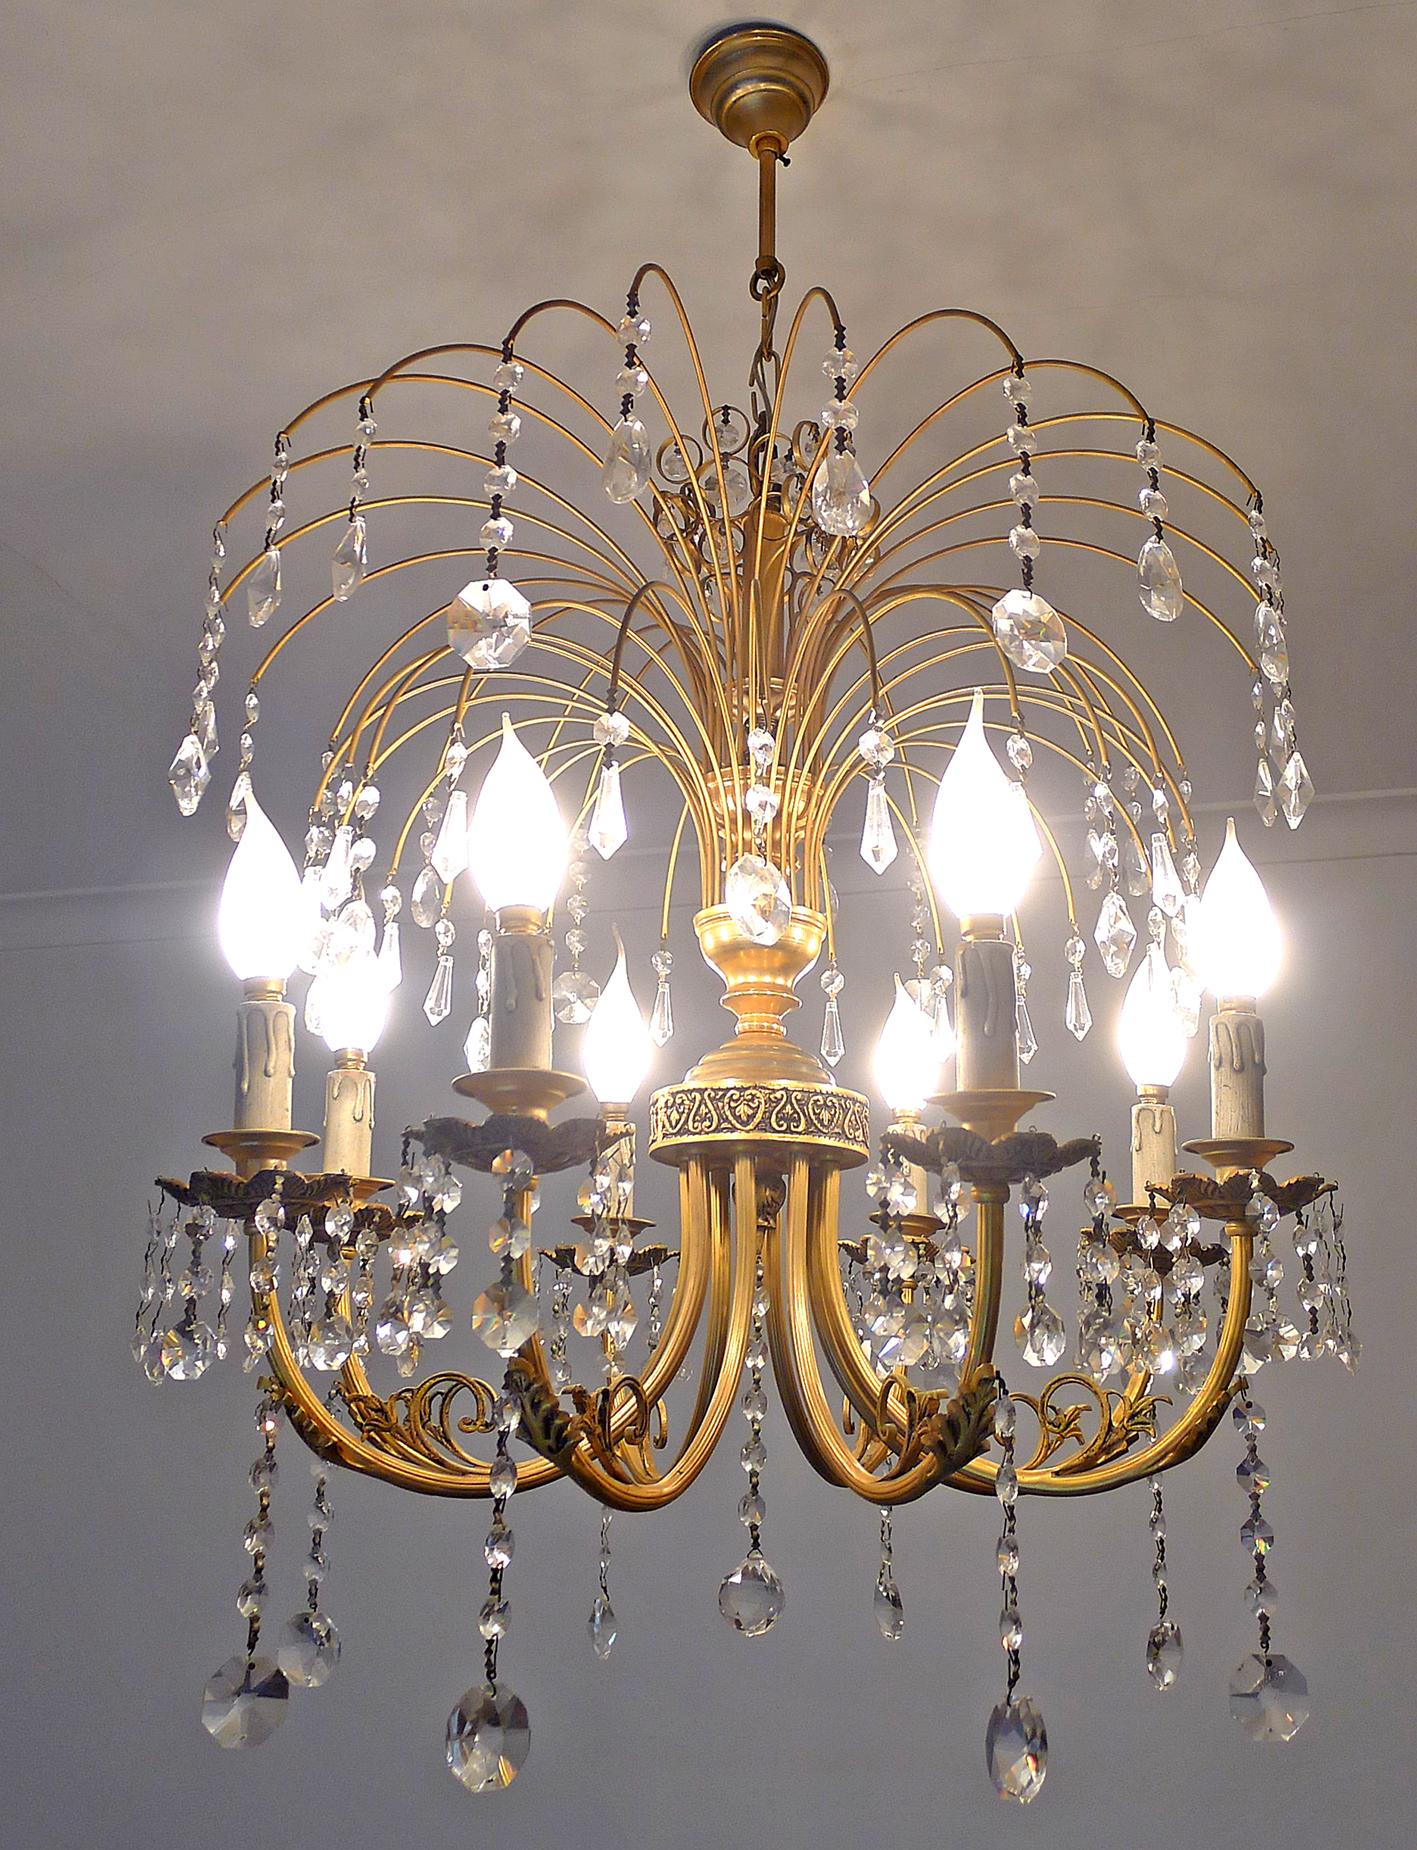 Hollywood Regency Crystal Cascade Waterfall Ornate Gilt Brass 8-Light Chandelier In Good Condition For Sale In Coimbra, PT